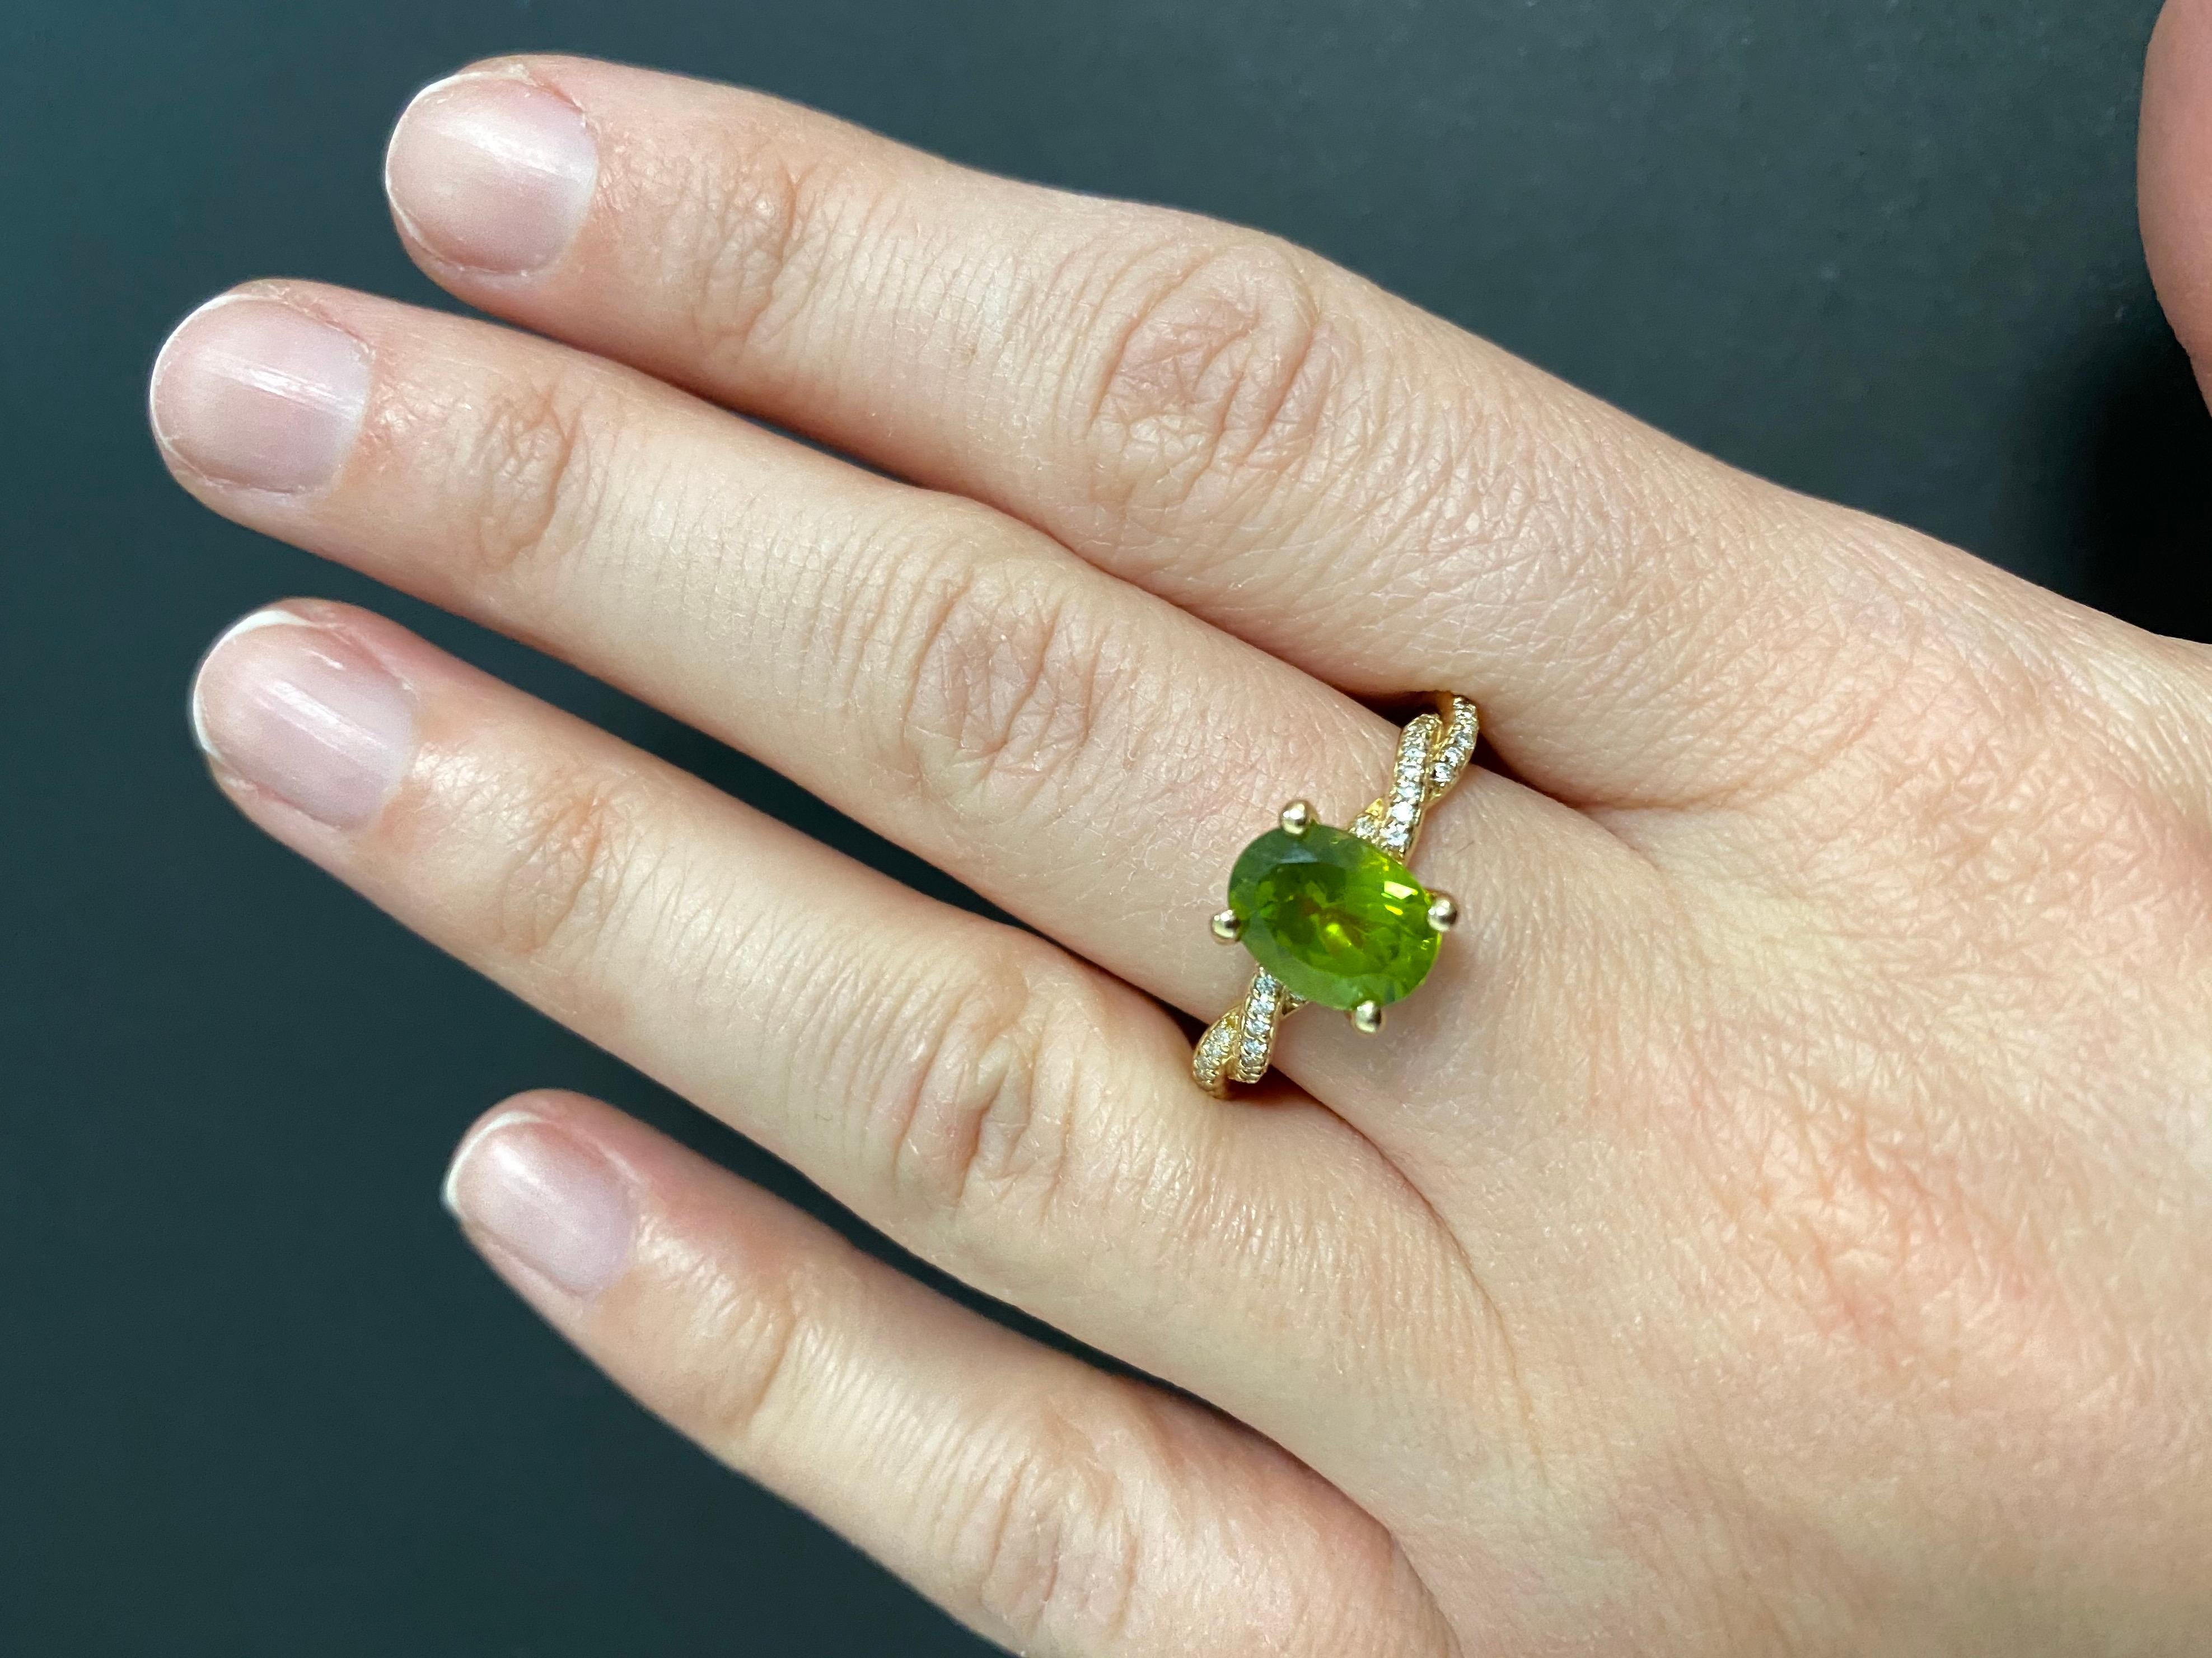 Material: 14k Yellow Gold 
Center Stone Details: 1 Oval Shaped Peridot at 2 Carats - Measuring 7 x 9 mm
Diamond Details: 34 Round Brilliant White Diamonds at 0.13 Carats - Clarity: SI / Color: H-I

Alberto offers complimentary sizing on all